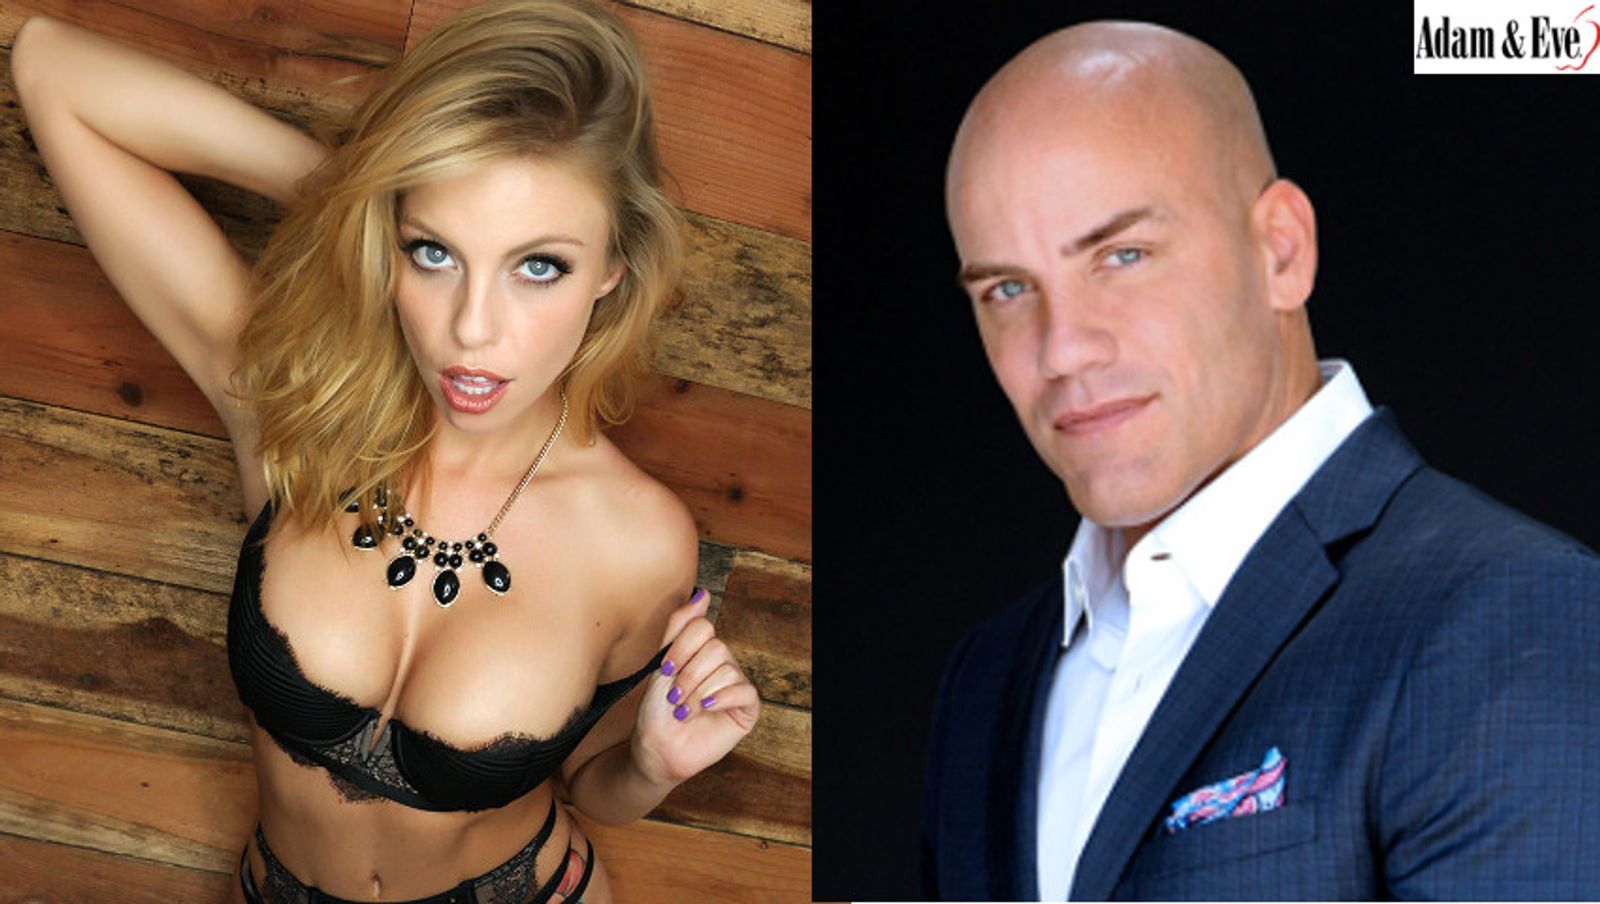 Britney Amber, Derrick Pierce to Star in Kay Brandt’s ‘Naked’ for Adam & Eve